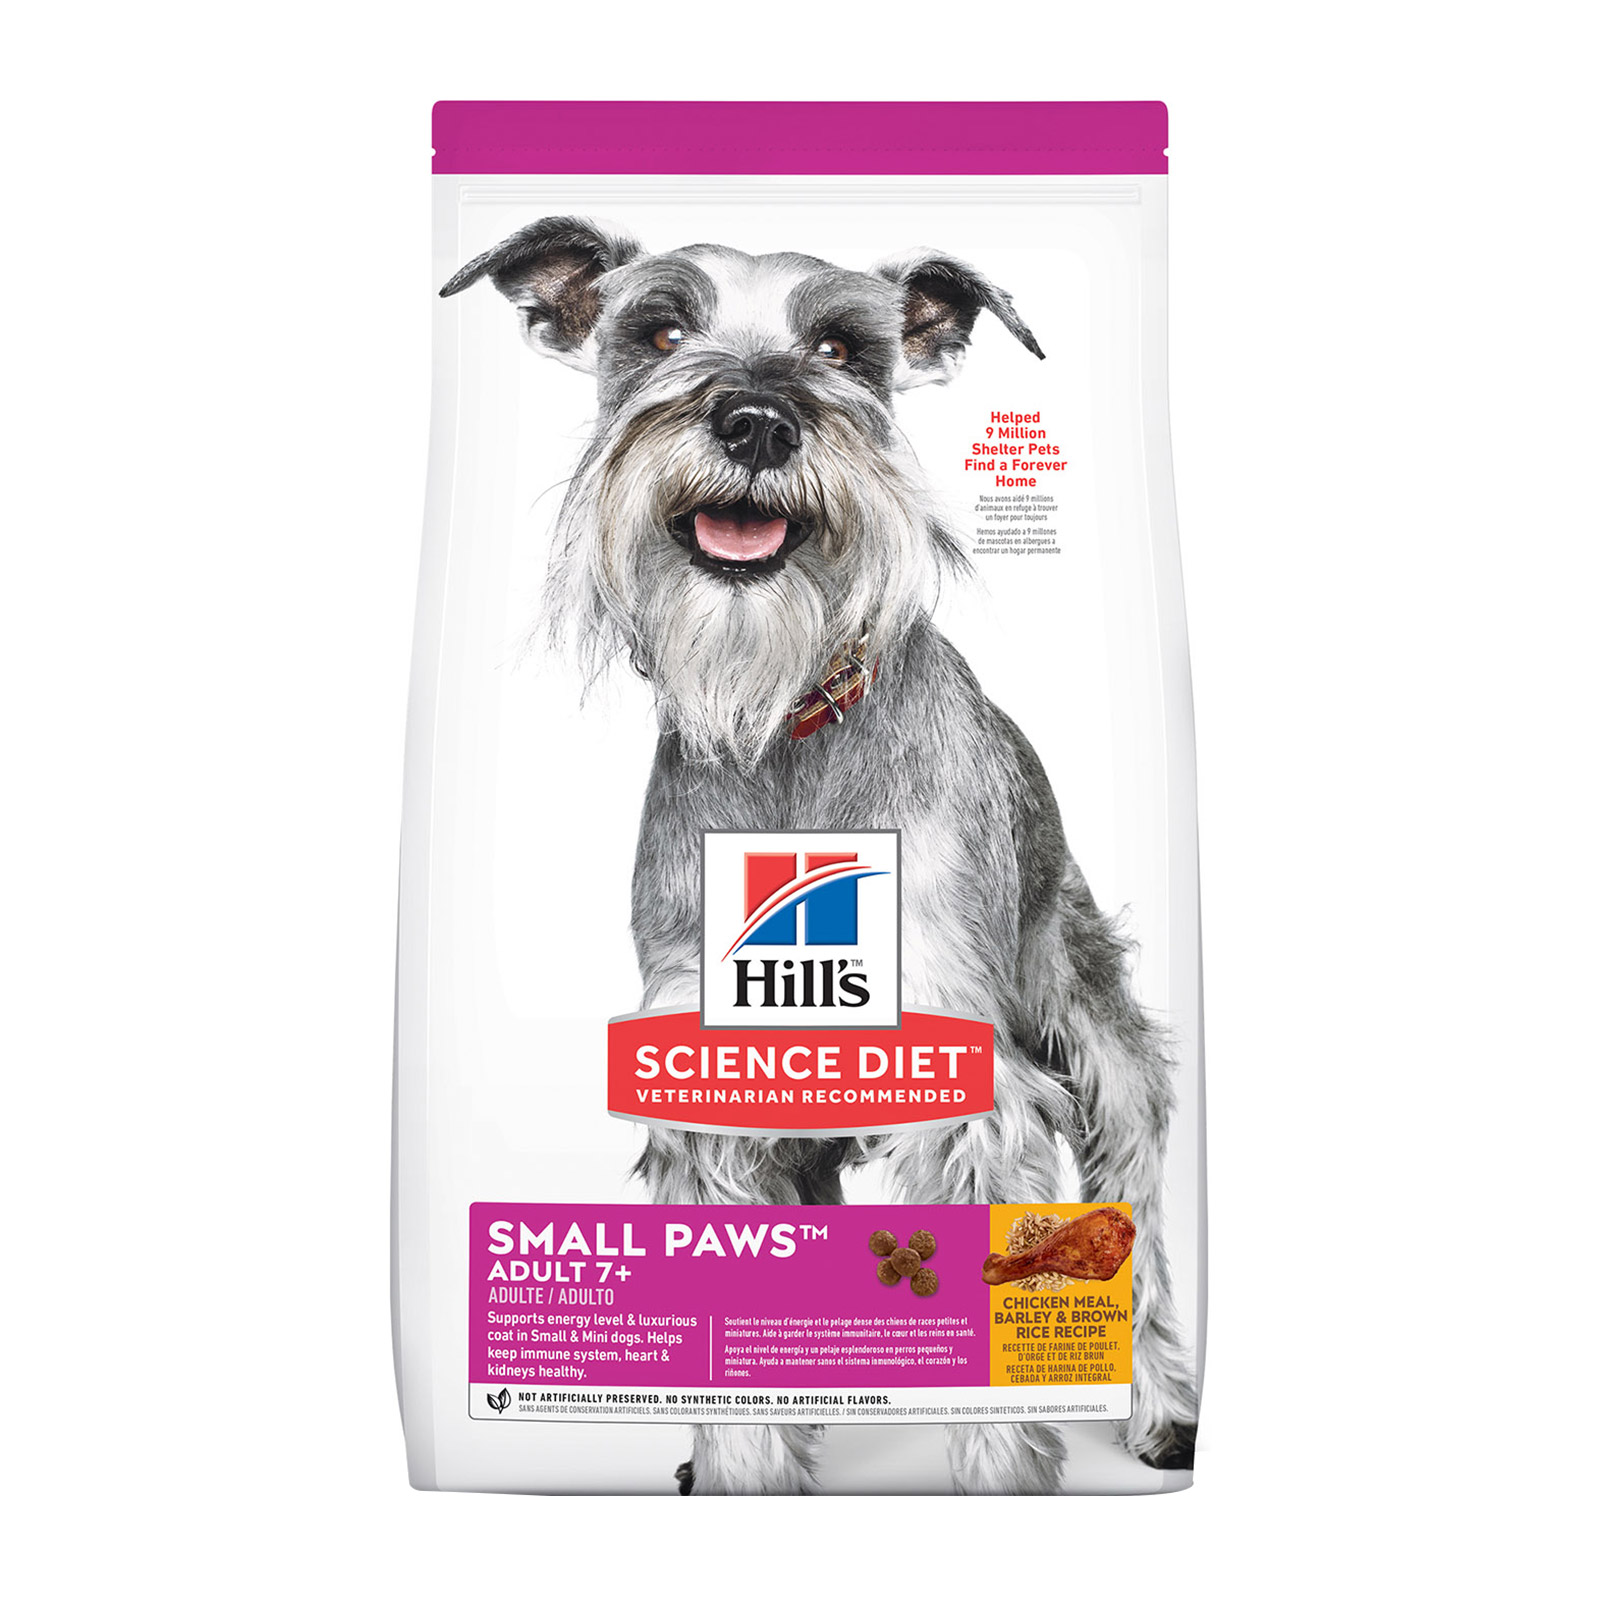 Hill's Science Diet Adult 7+ Small Paws Chicken, Barley & Rice Dry Dog Food for Food